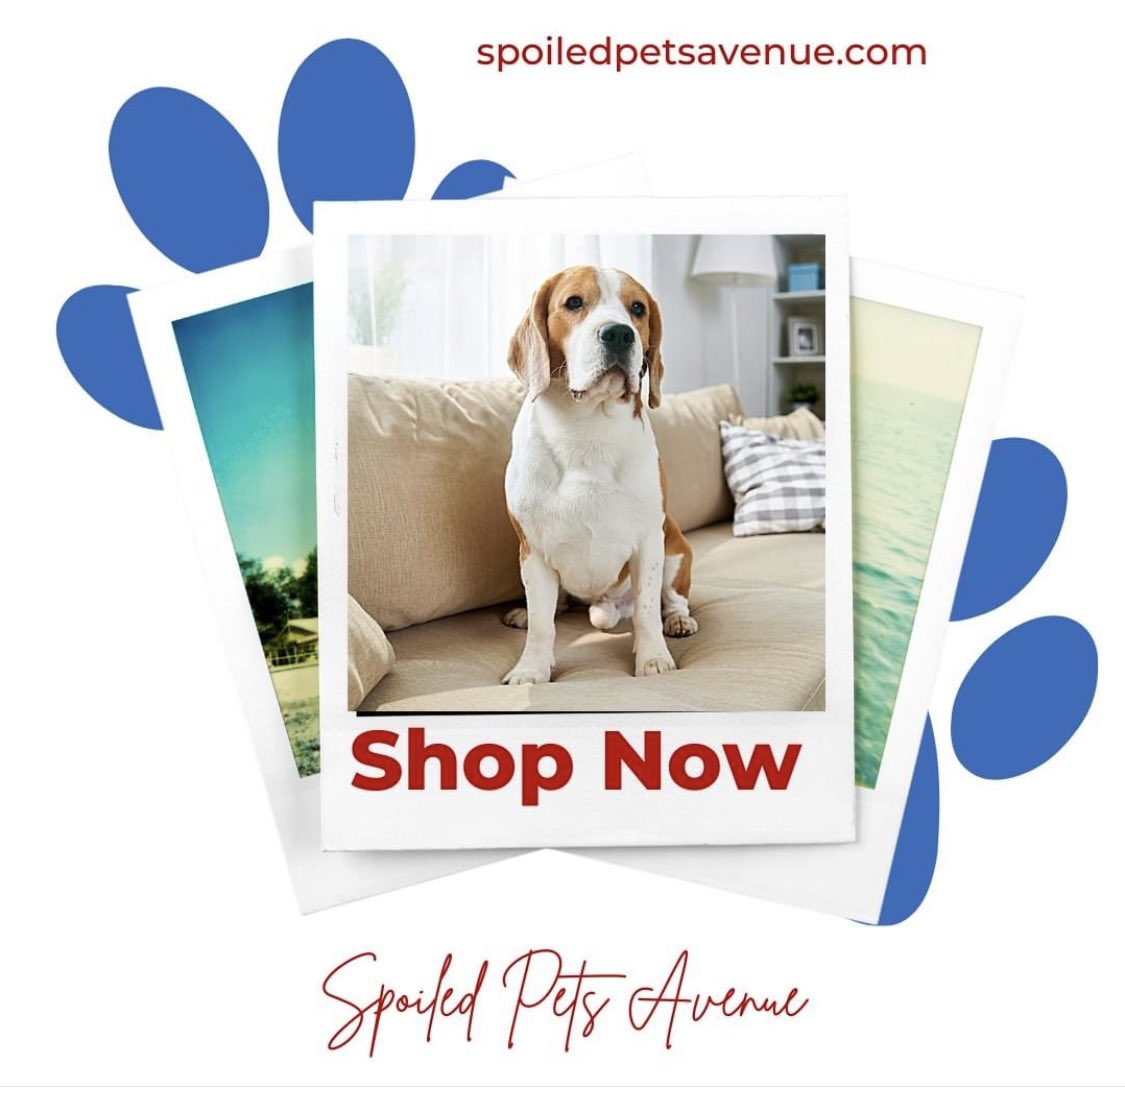 Give your pet the high life they deserve with our luxury essentials .#HappyPets #PetCare #CuttingEdgePetSupplies #SpoiledPetsAvenue #PetSafety
#TravelWithPets
spoiledpetsavenue.com